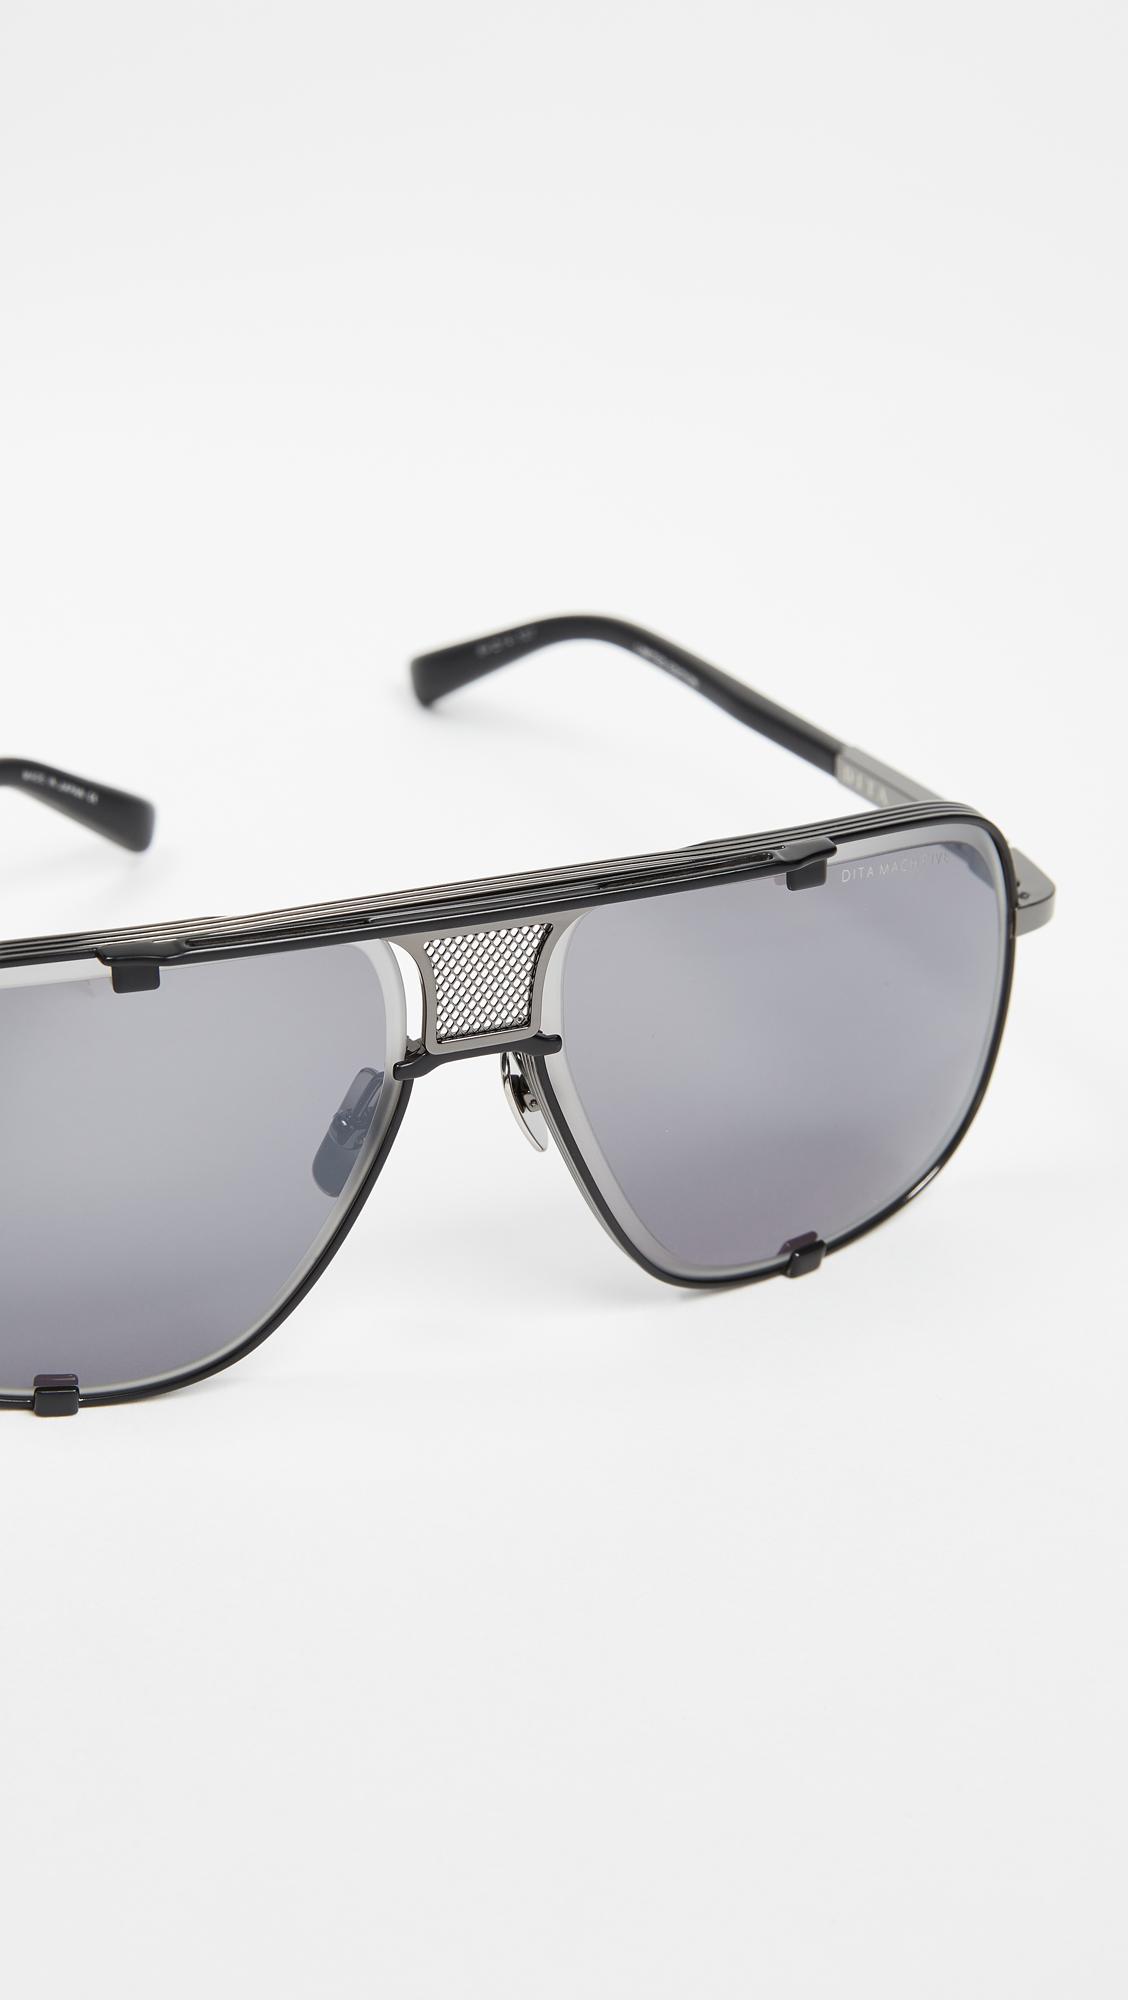 DITA Mach Five Limited Edition Sunglasses in Gray - Lyst